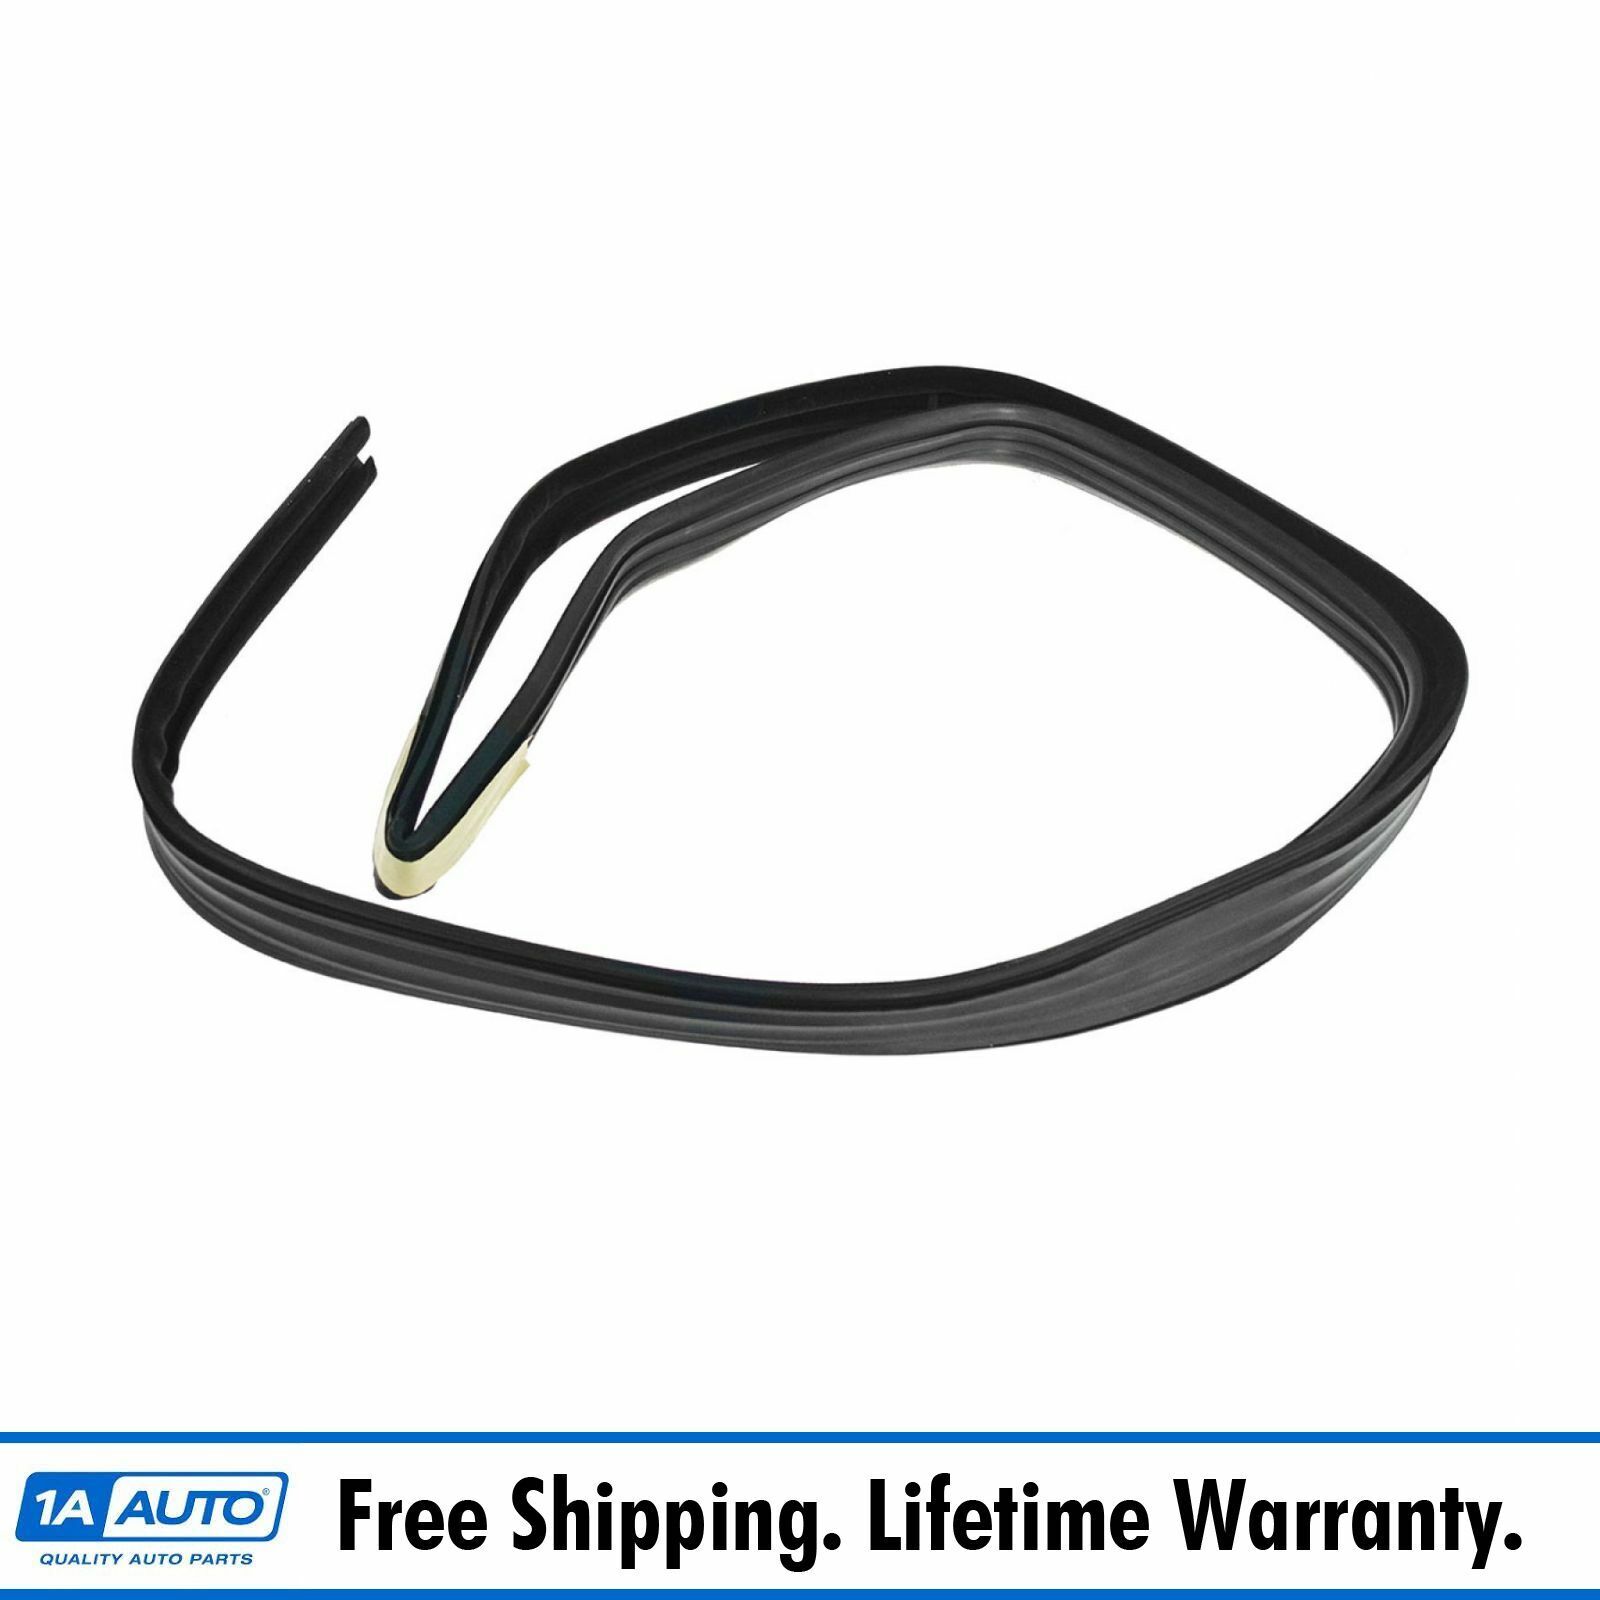 Glass Run Channel Front Door Weatherstrip Bla for Seal GMC Chevy Inexpensive Our shop most popular